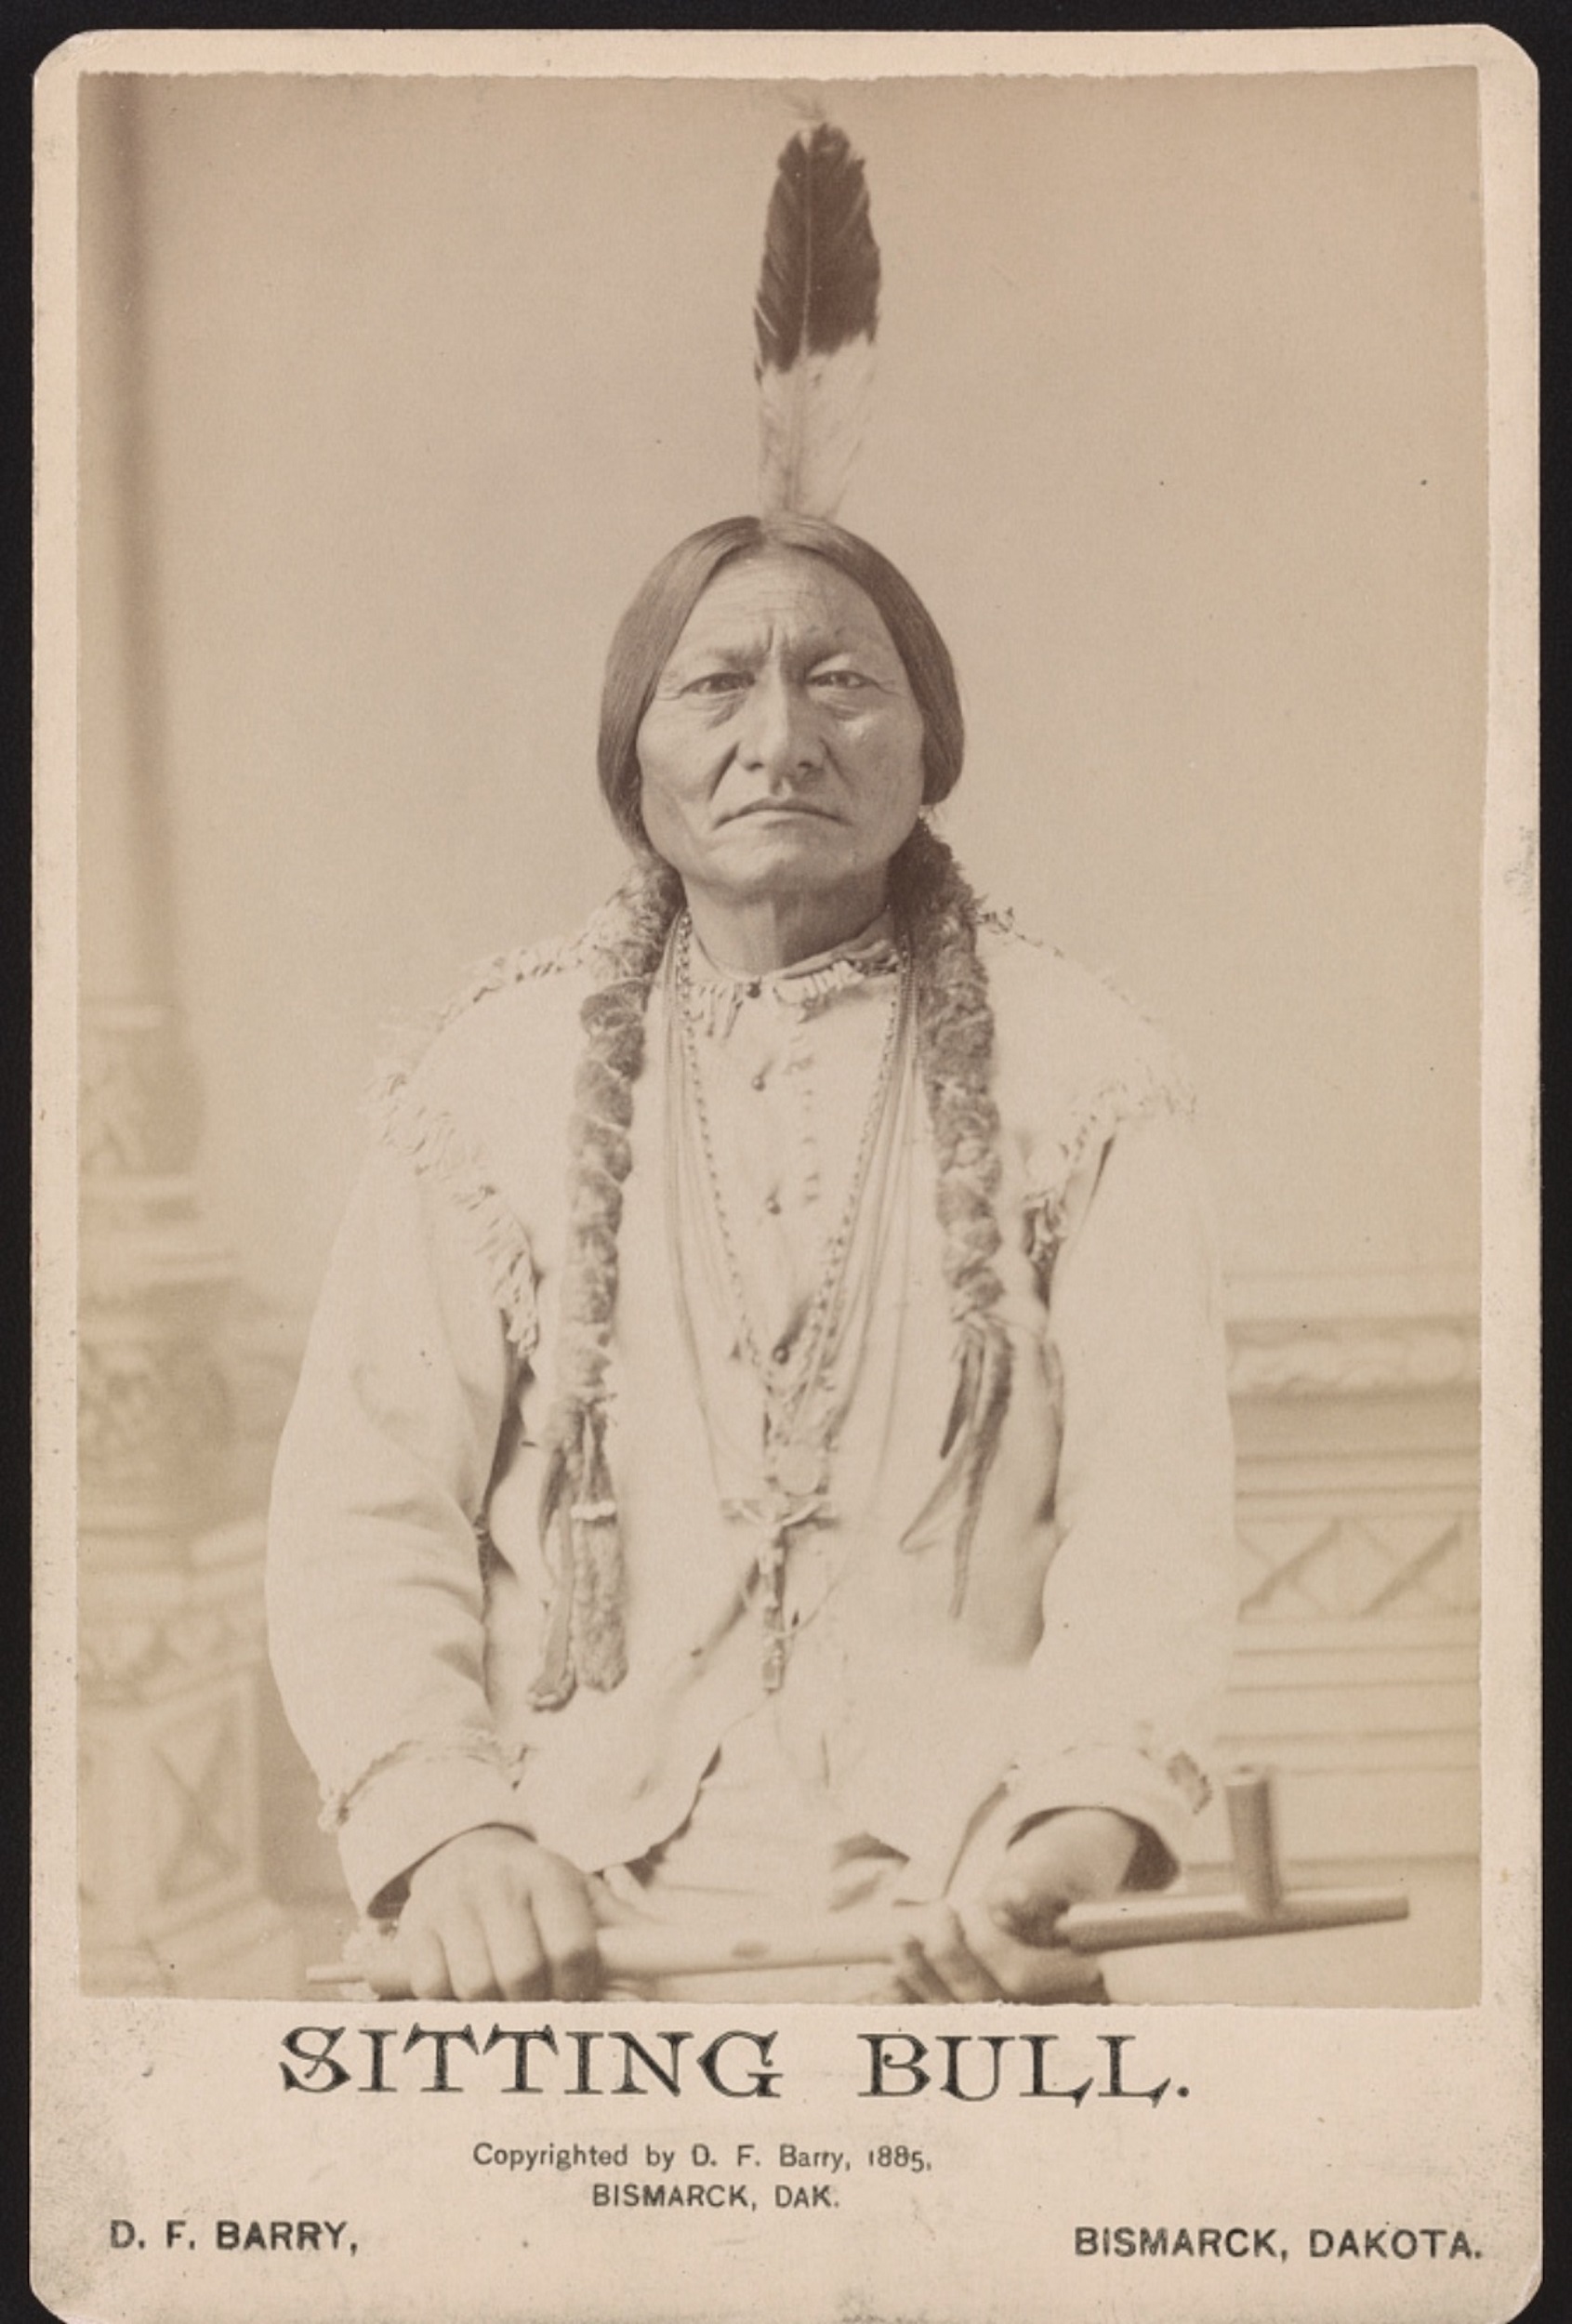 Sepia-tone carte de visite photograph of a Native American man with a tall father on his head. The words below read "Sitting Bull / Copyrighted by D. F. Barry, 1885 / Bismarck, DAK. / D. F. Barry / Bismarck, Dakota